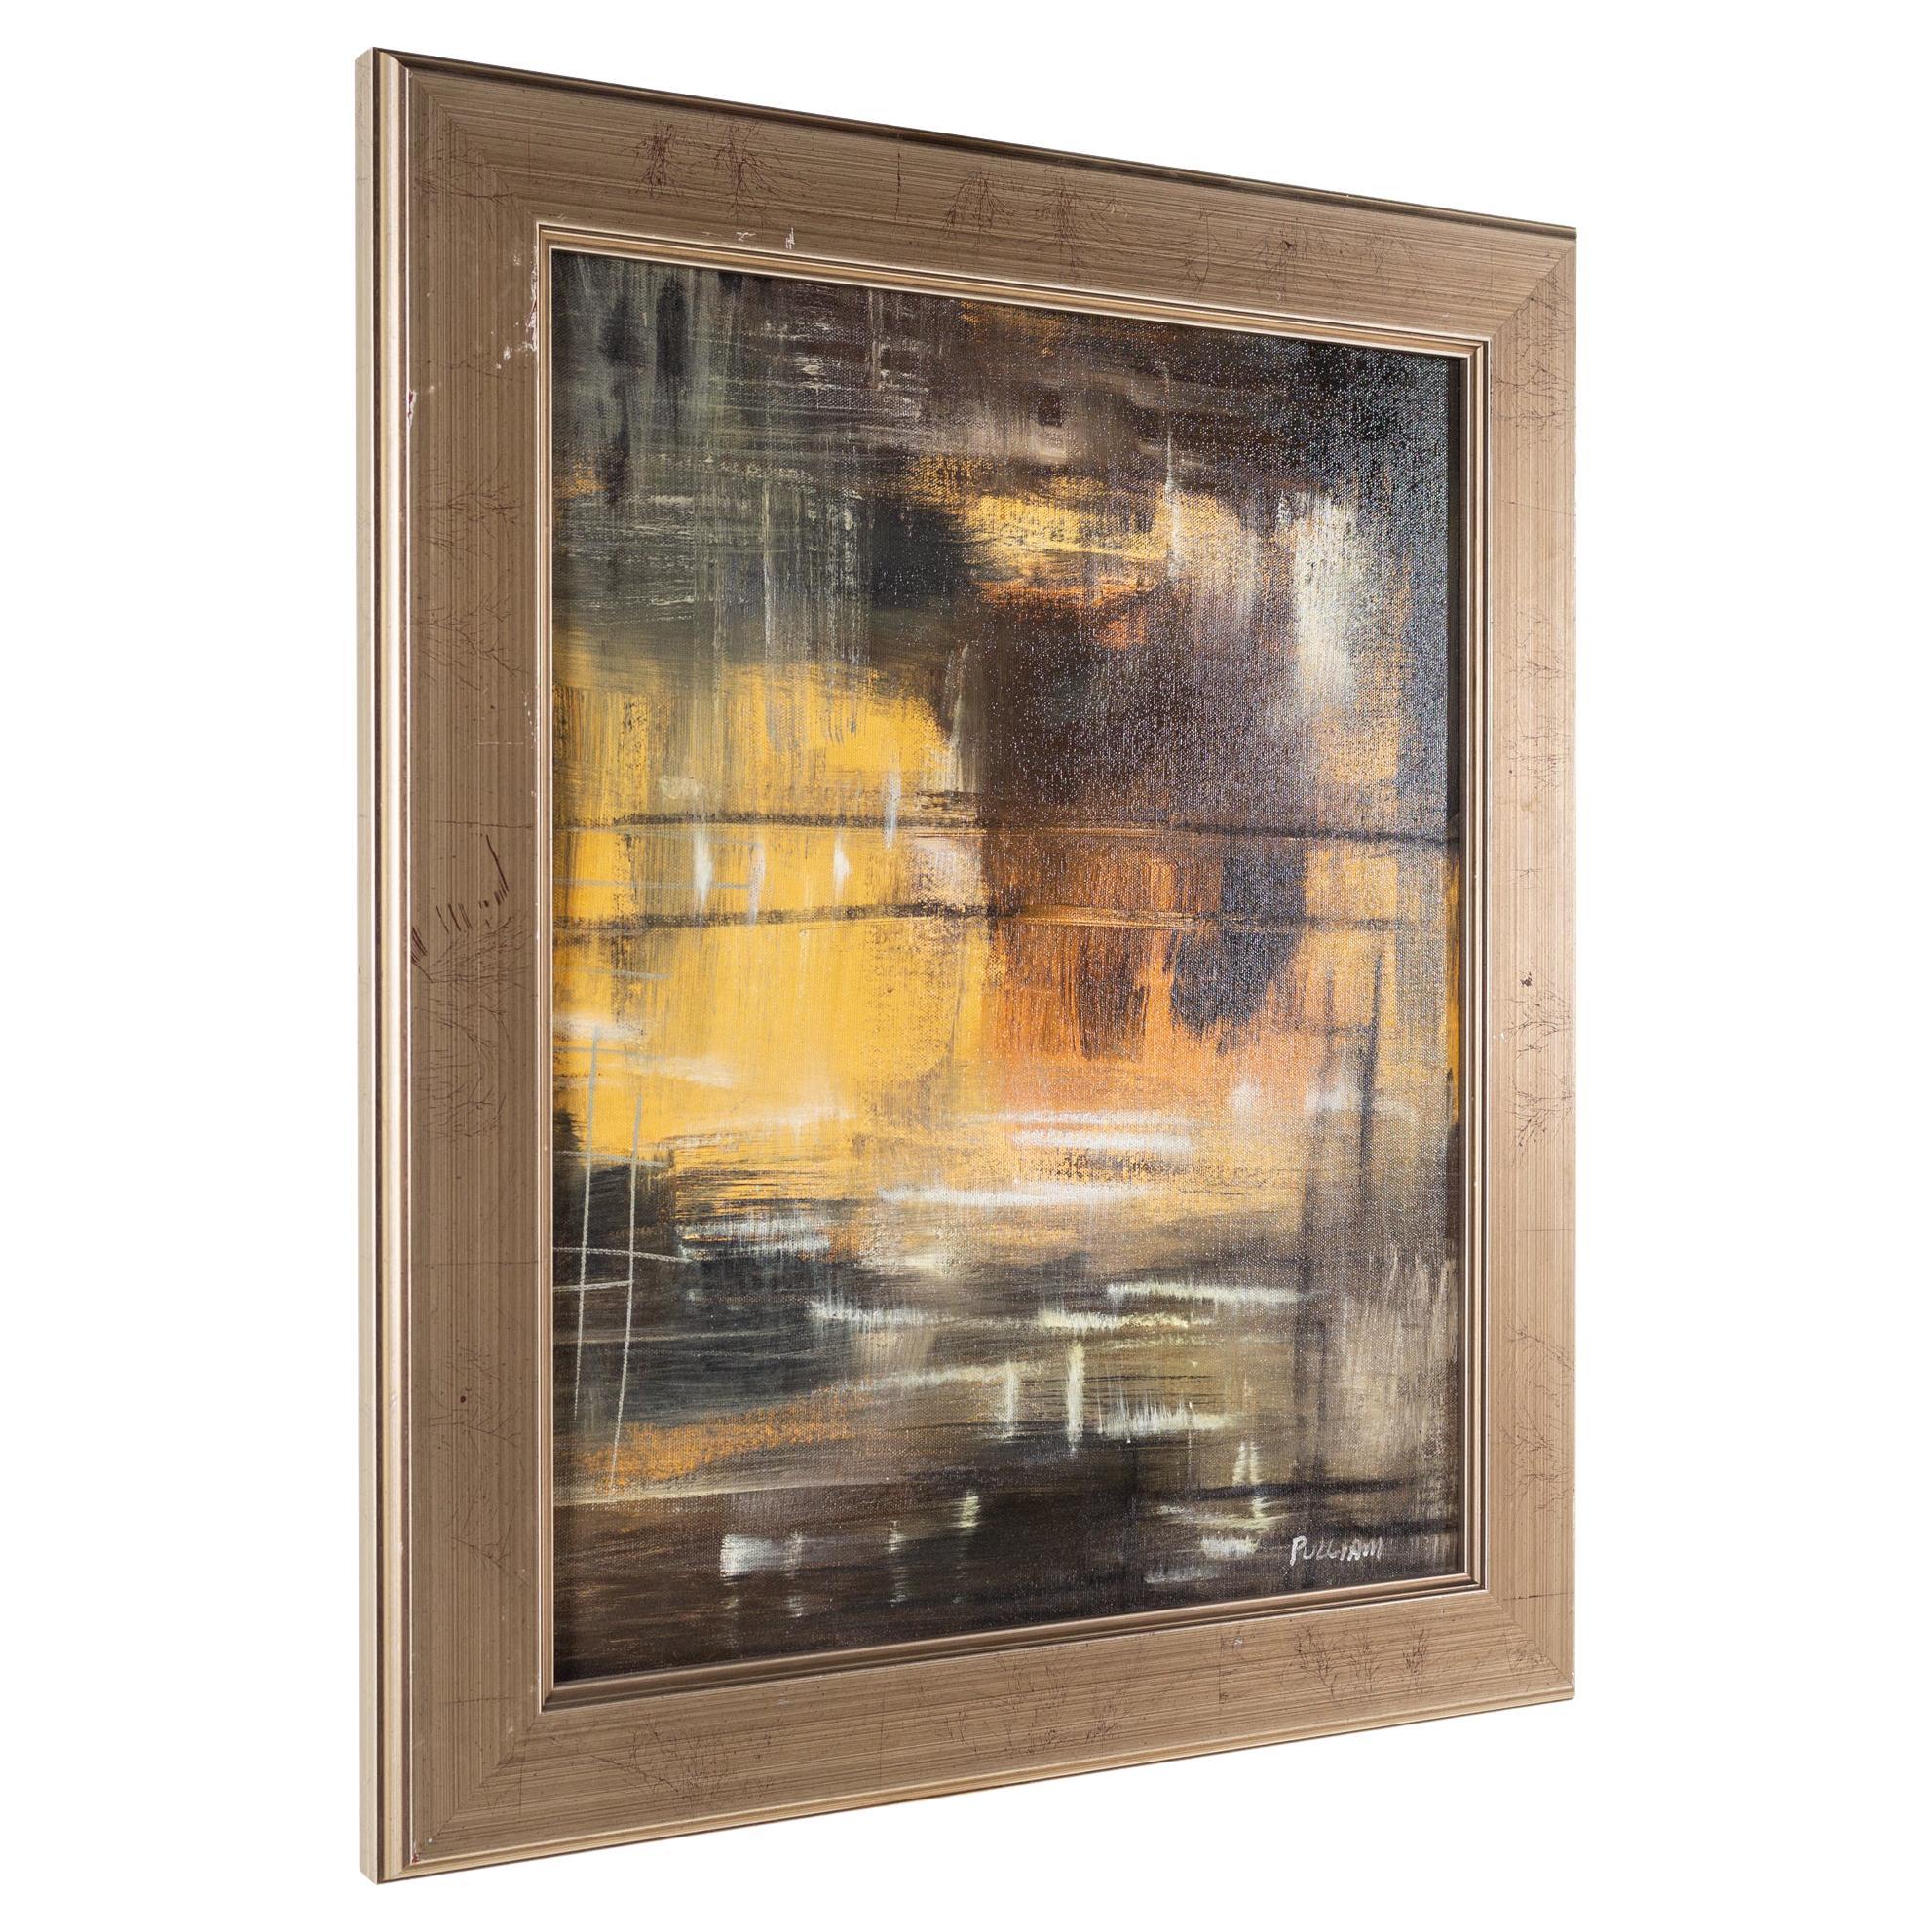 Pulliam Abstract Framed Oil Painting on Canvas